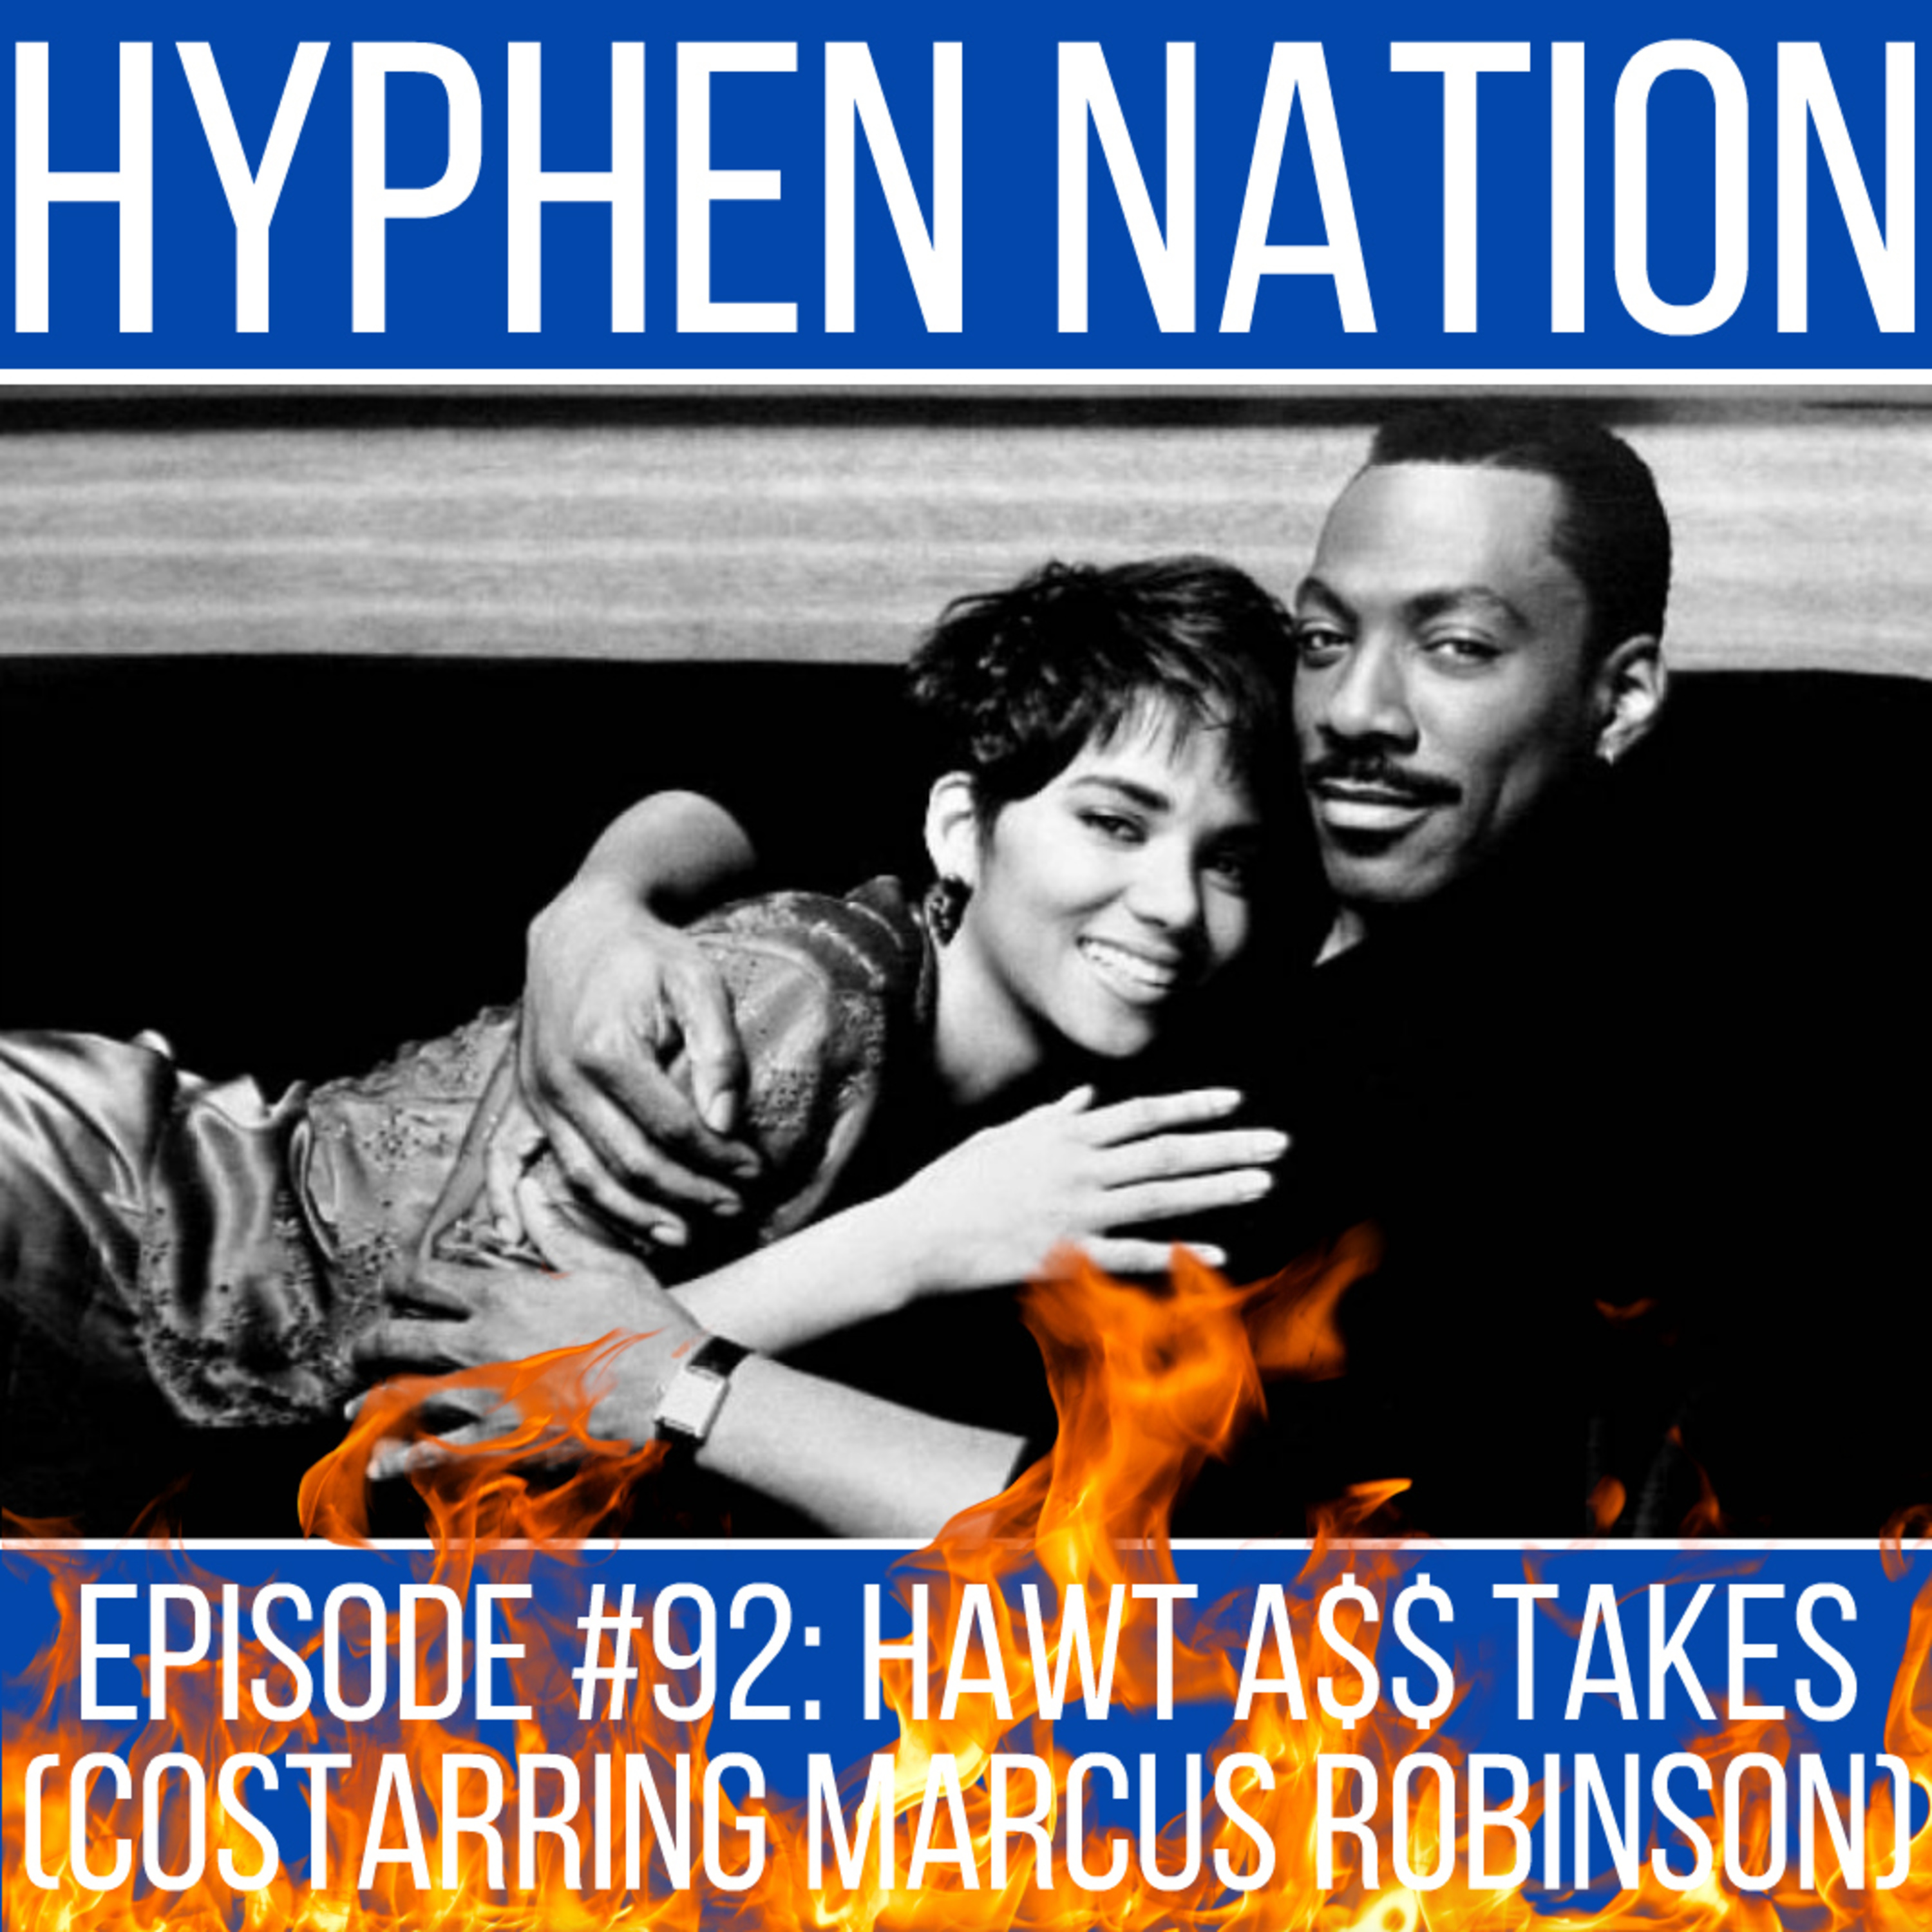 Episode #92: Hawt A$$ Takes (Costarring Marcus Robinson)